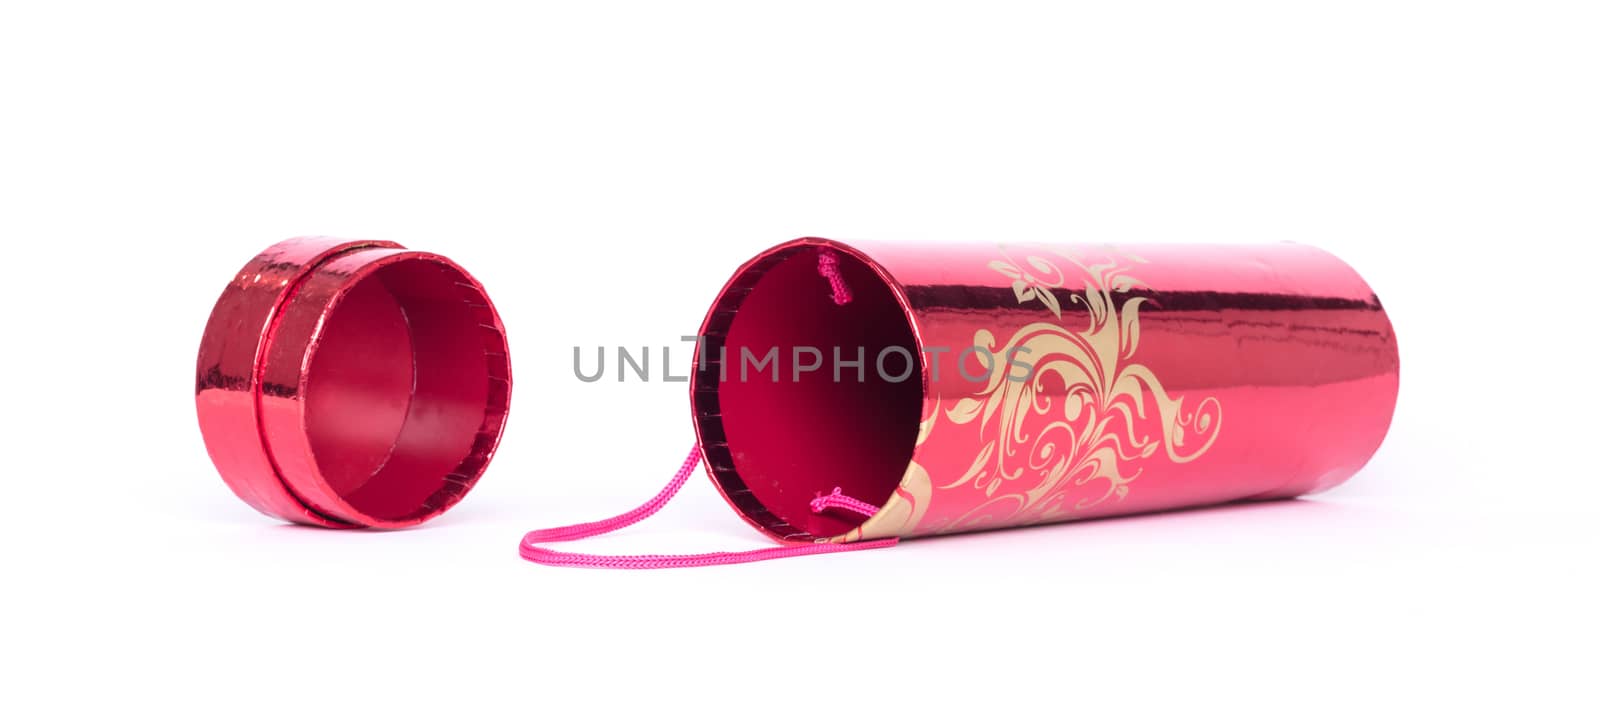 Wine as a party gift, isolated on white